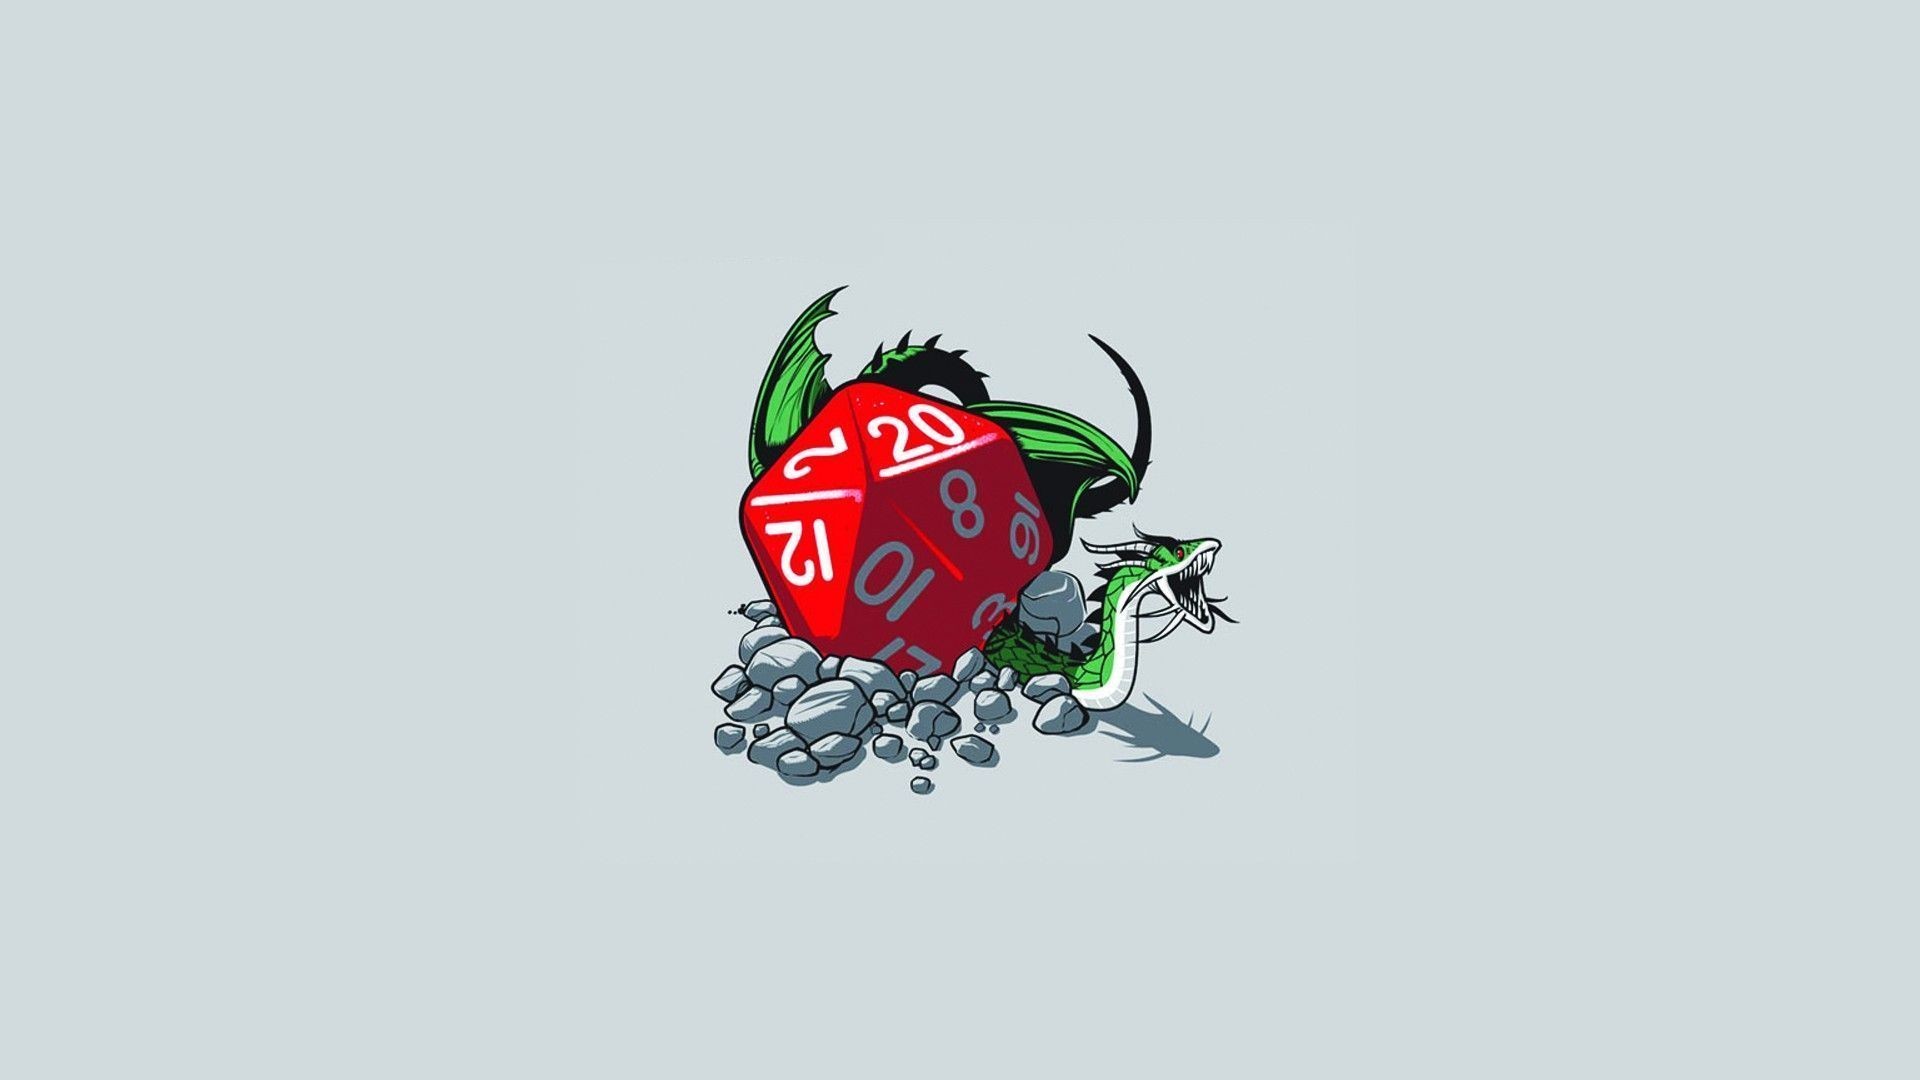 1920x1080 dice wallpapers